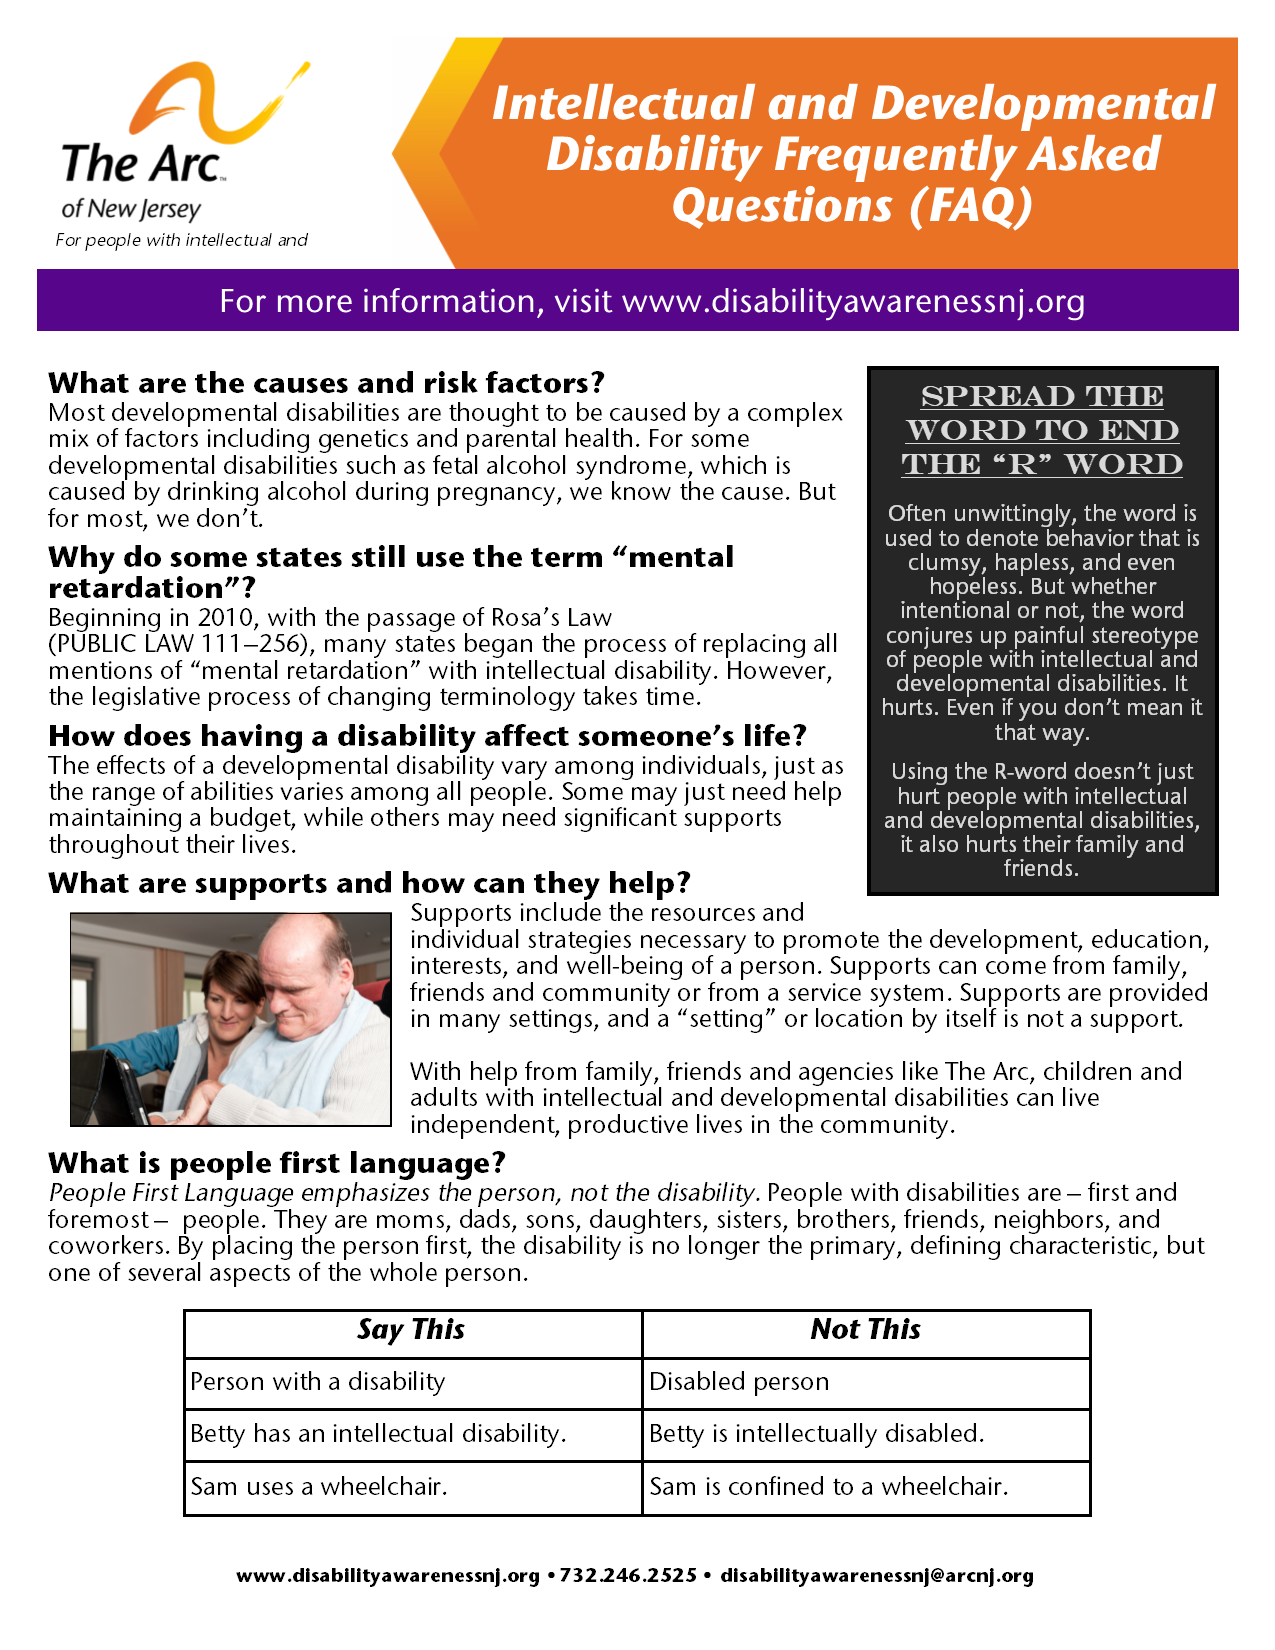 Intellectual and Developmental Disability Frequently Asked Questions (FAQ)